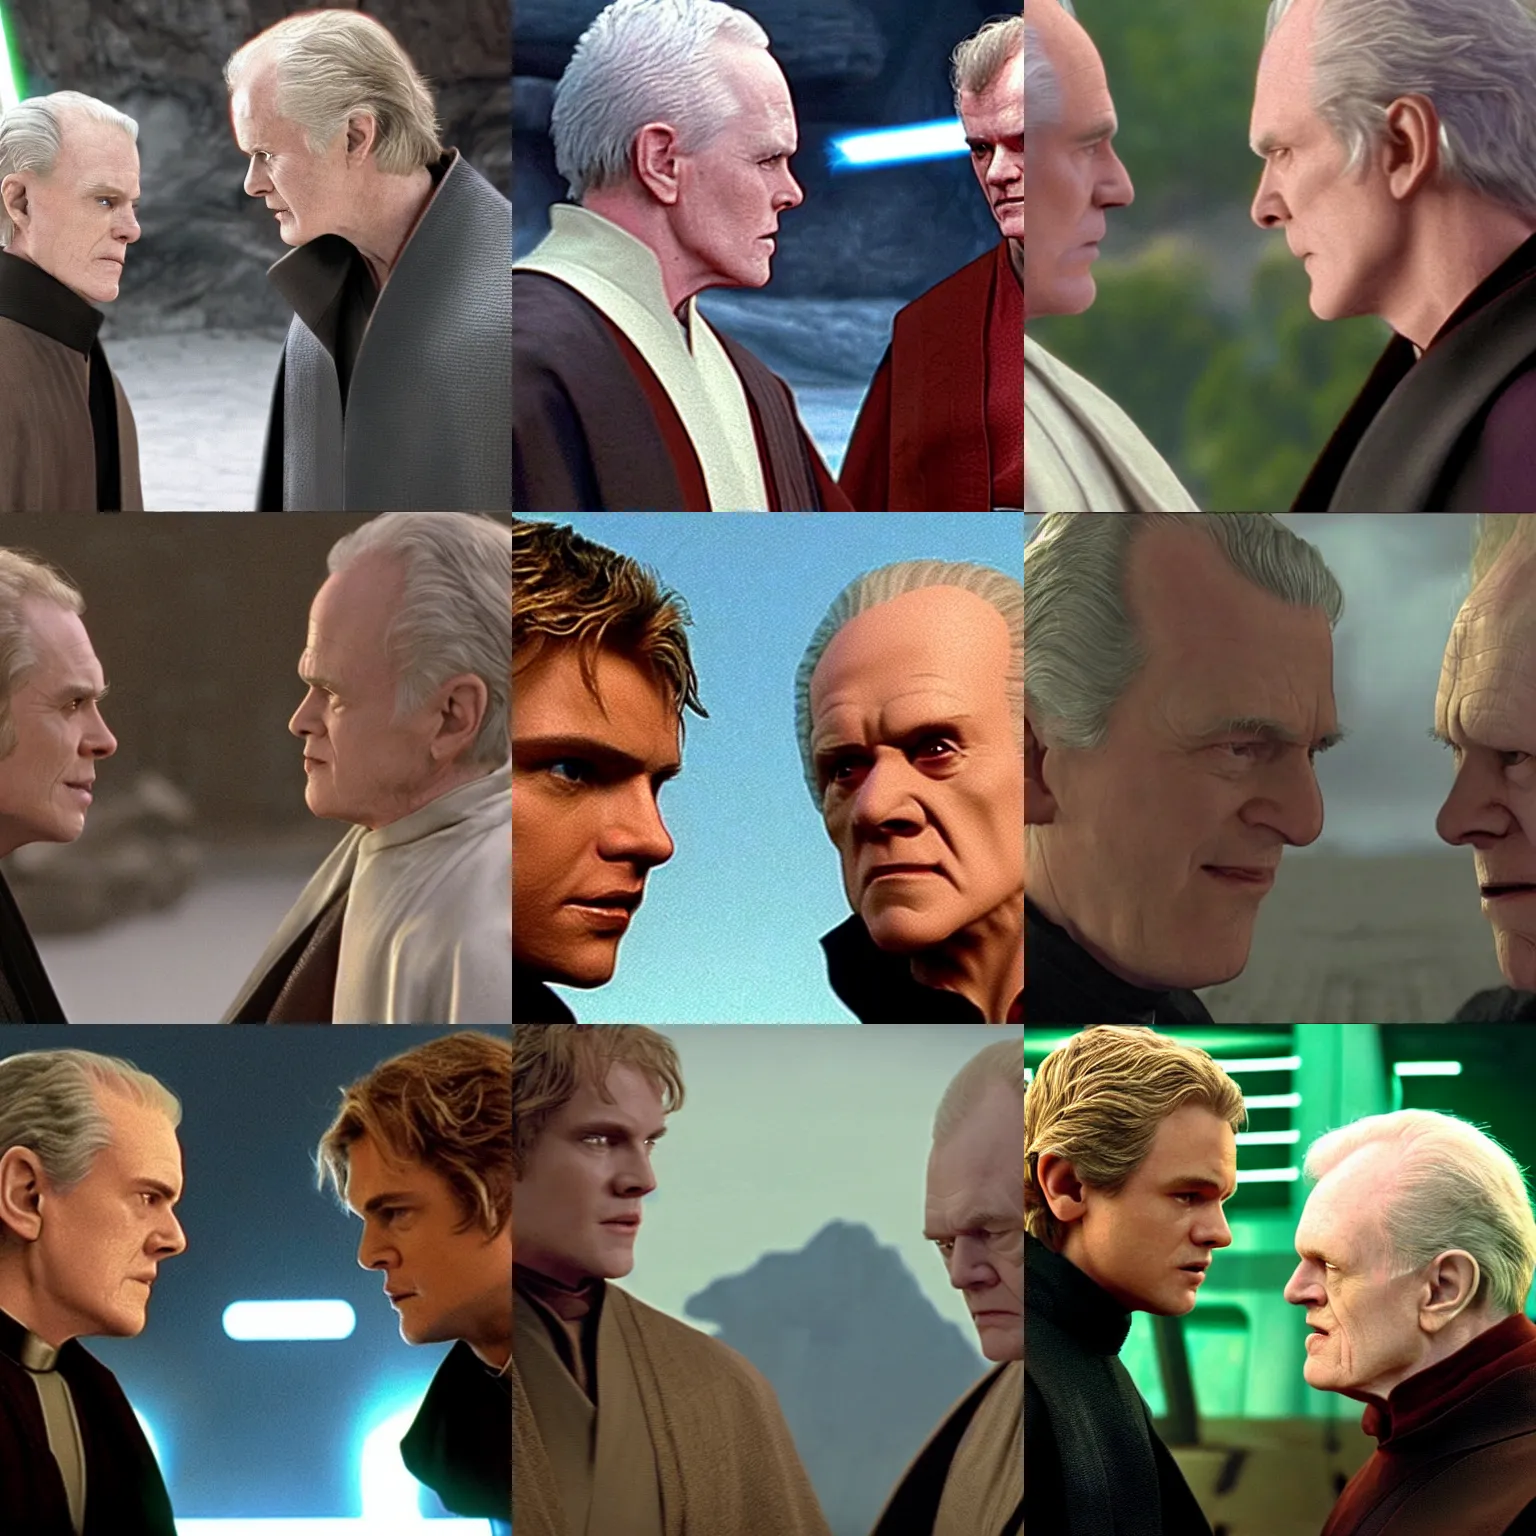 Prompt: movie still from Star Wars: Episode III - Revenge of the Sith of Anakin Skywalker and Chancellor Palpatine looking into each other's eyes romantically